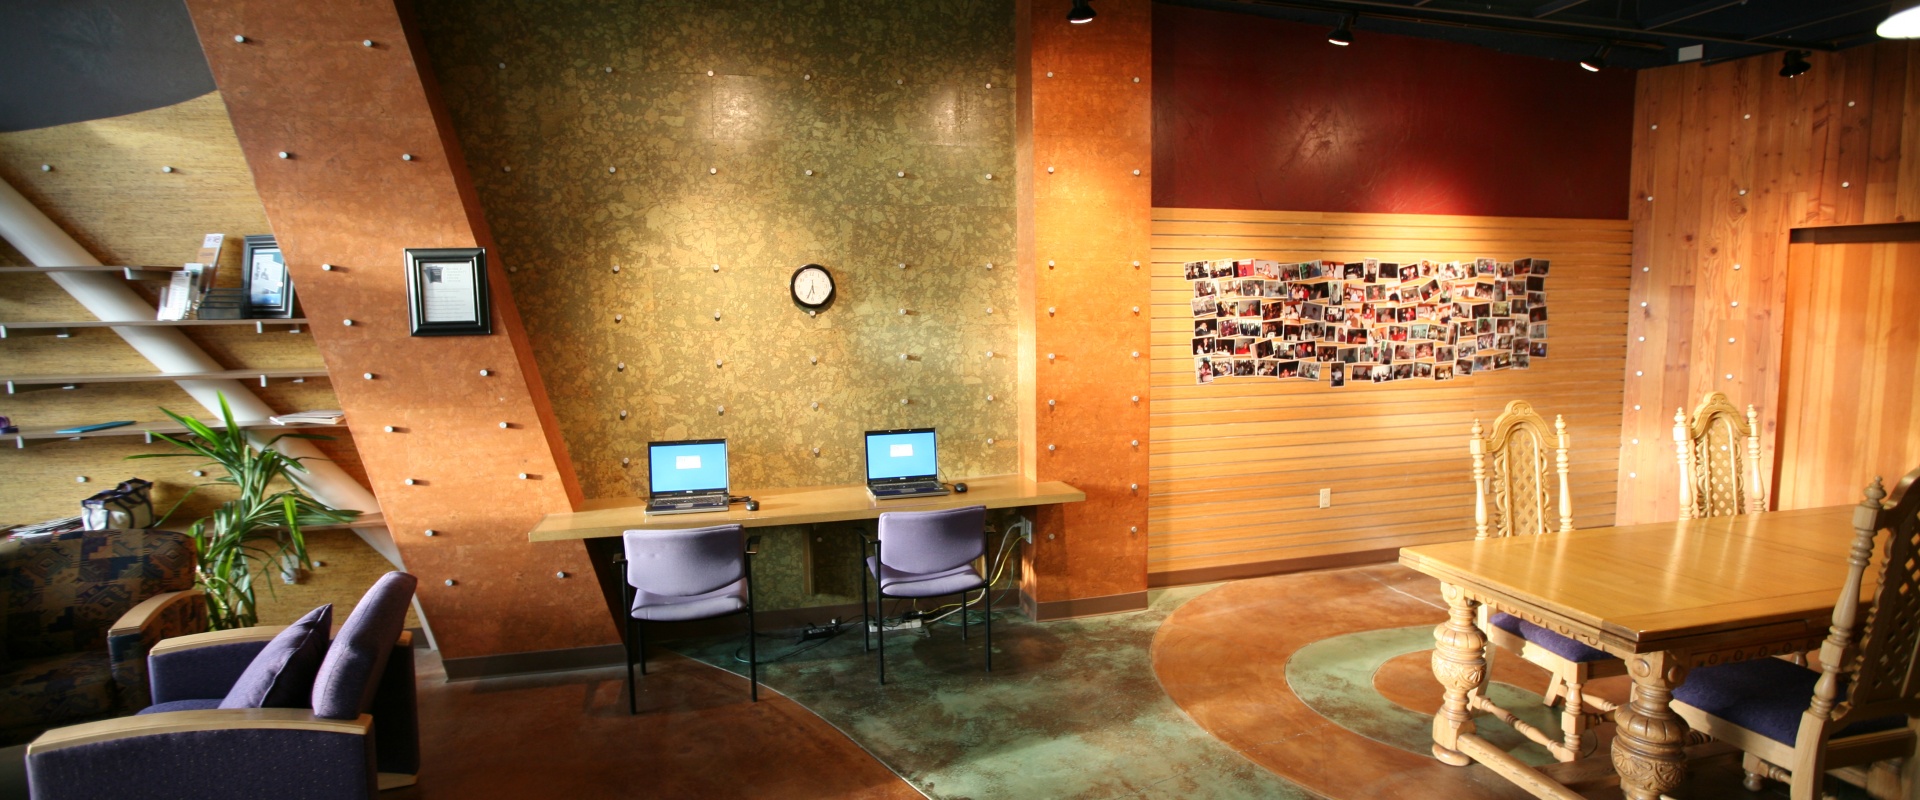 SLCC Writing Center - Library Square